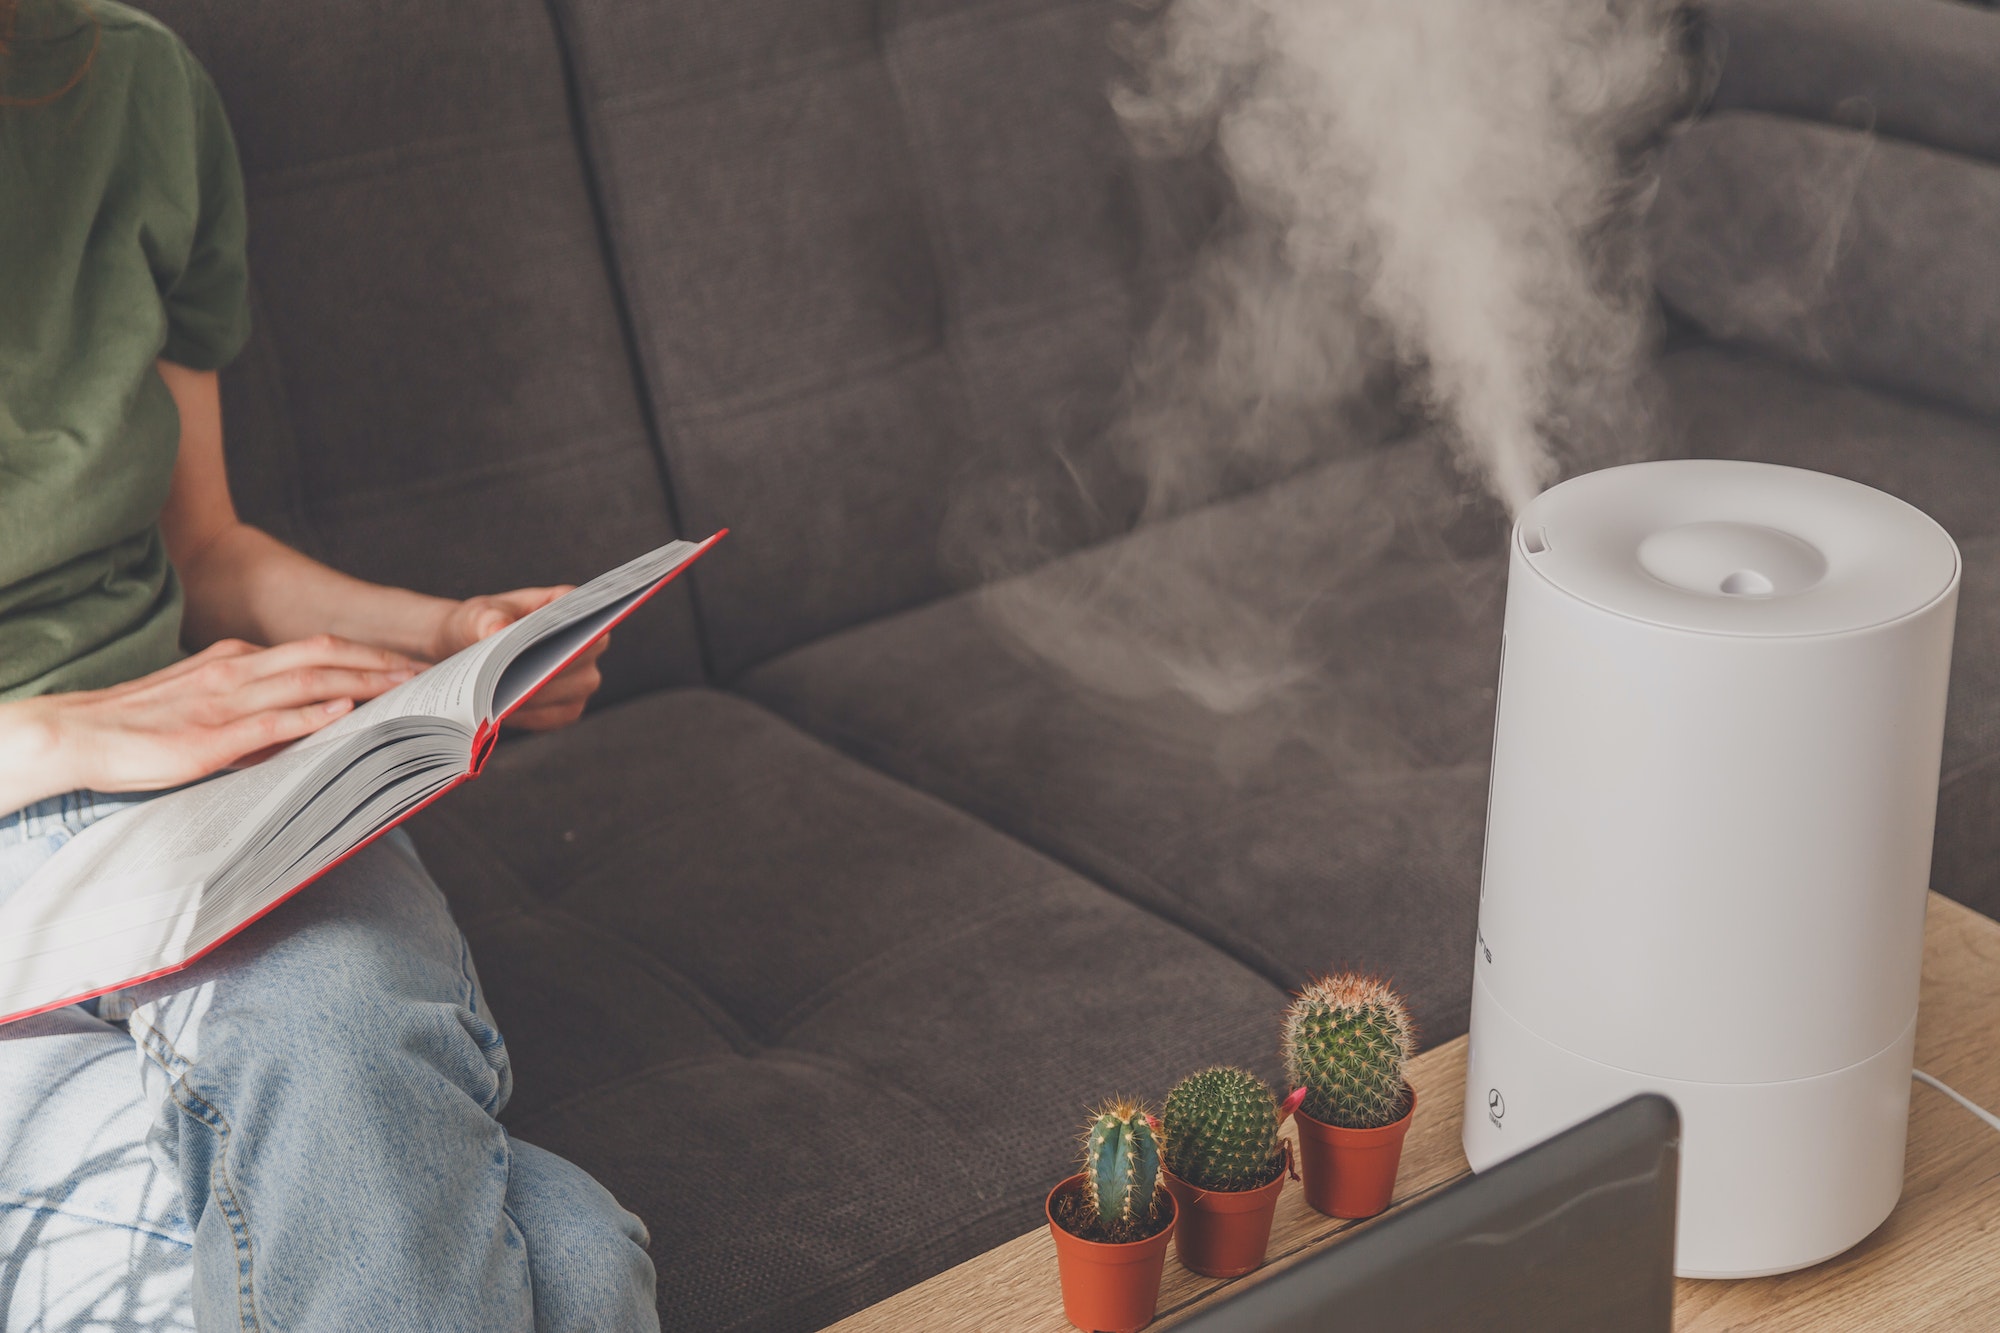 Household humidifier at home on table near woman reading on sofa.